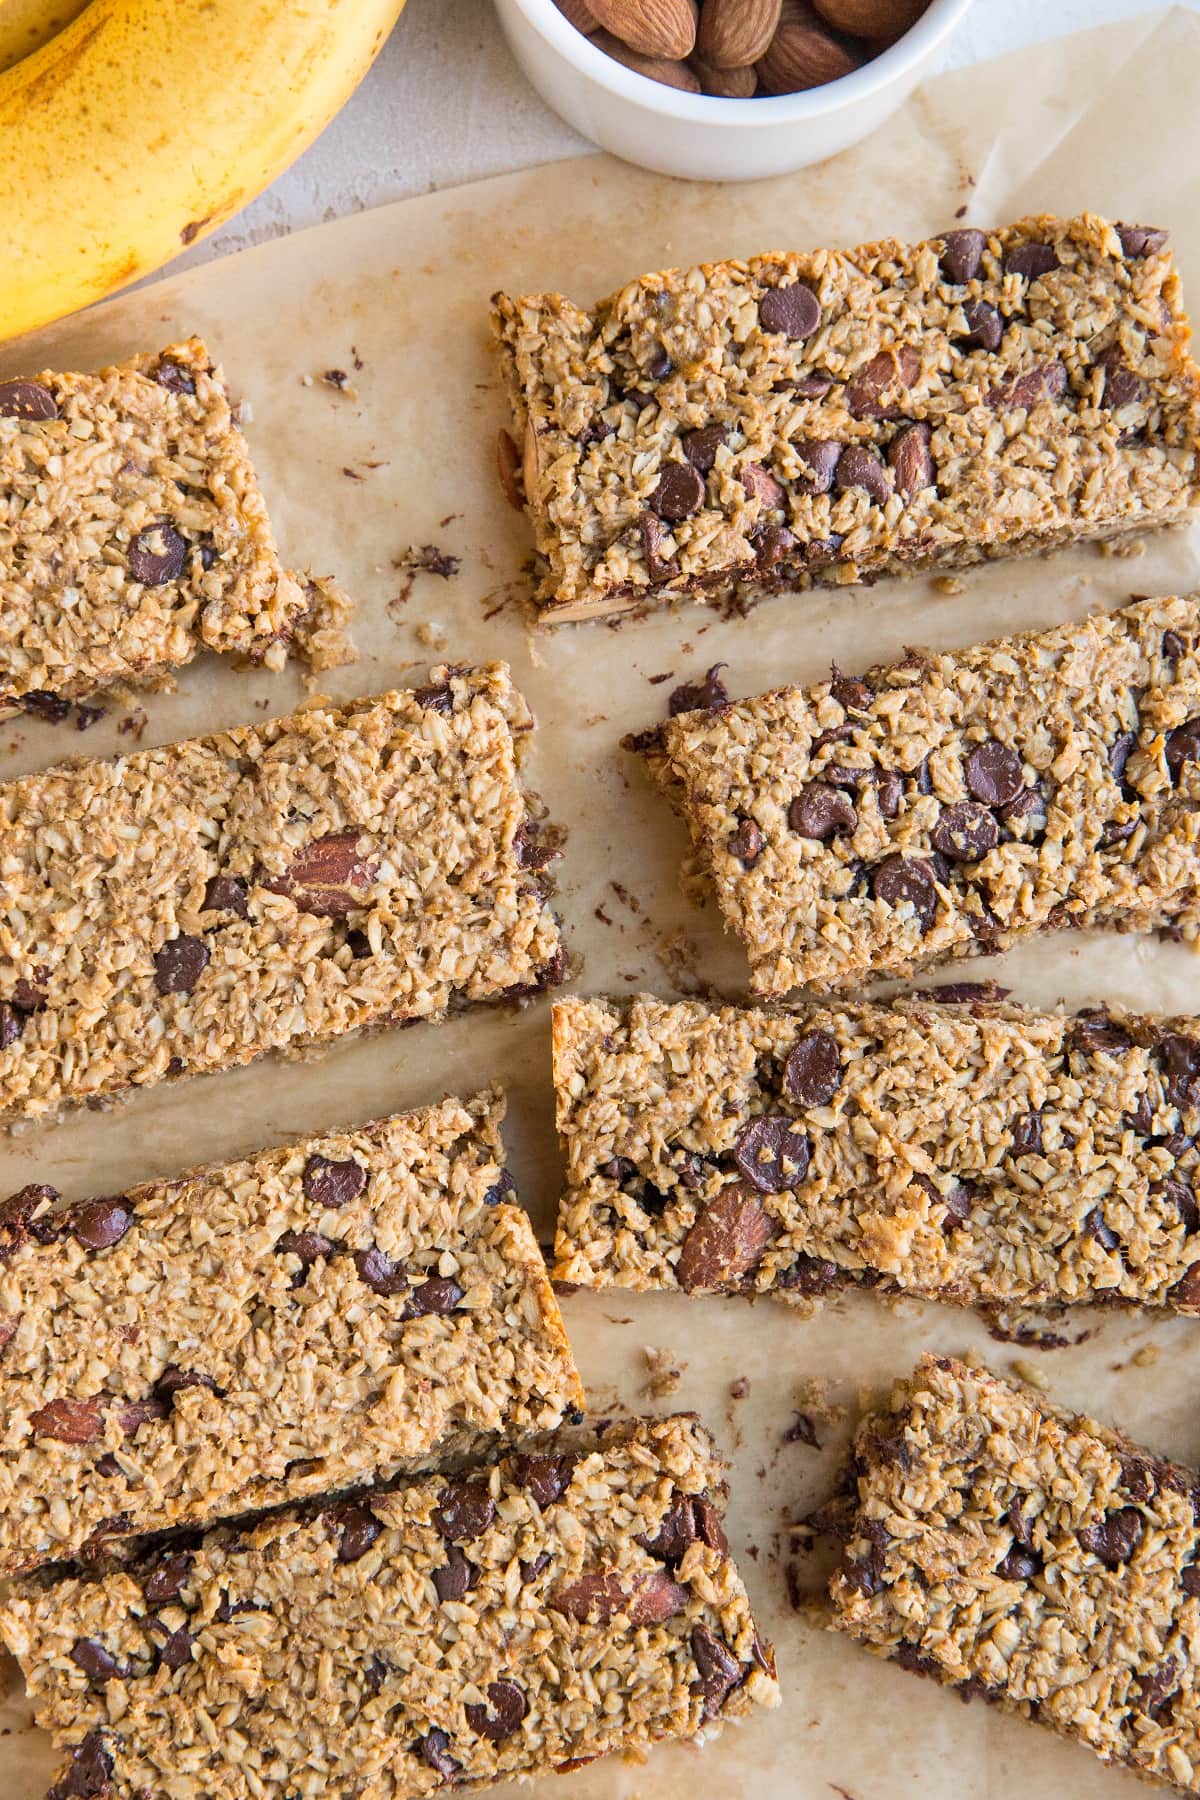 5-Ingredient Healthy Granola Bars sweetened mostly with banana. An easy, delicious crunchy granola bar recipe!